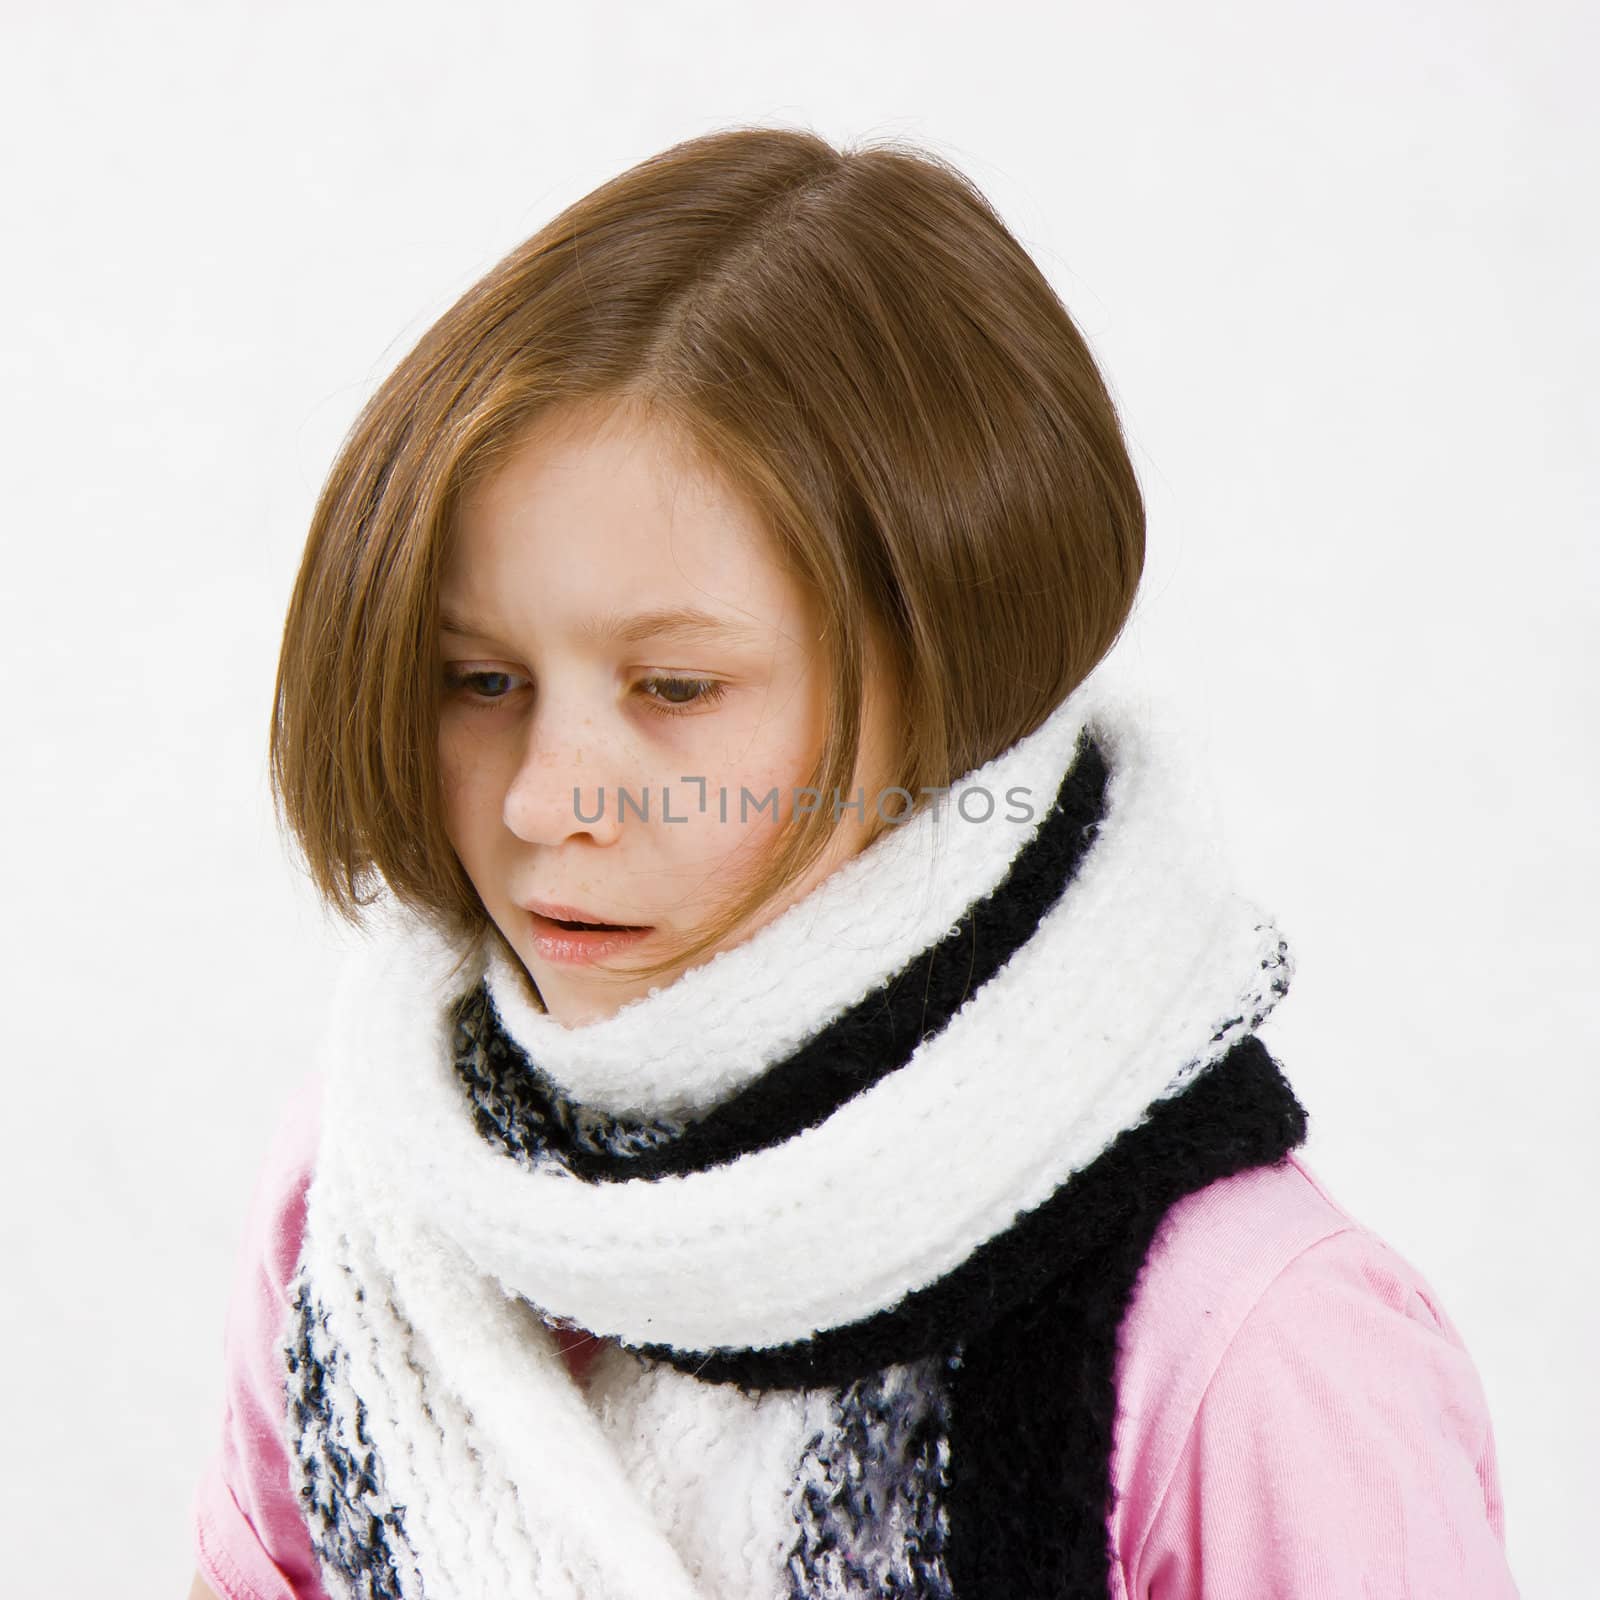 Teen girl wearing a scarf with a thermometer in her mouth